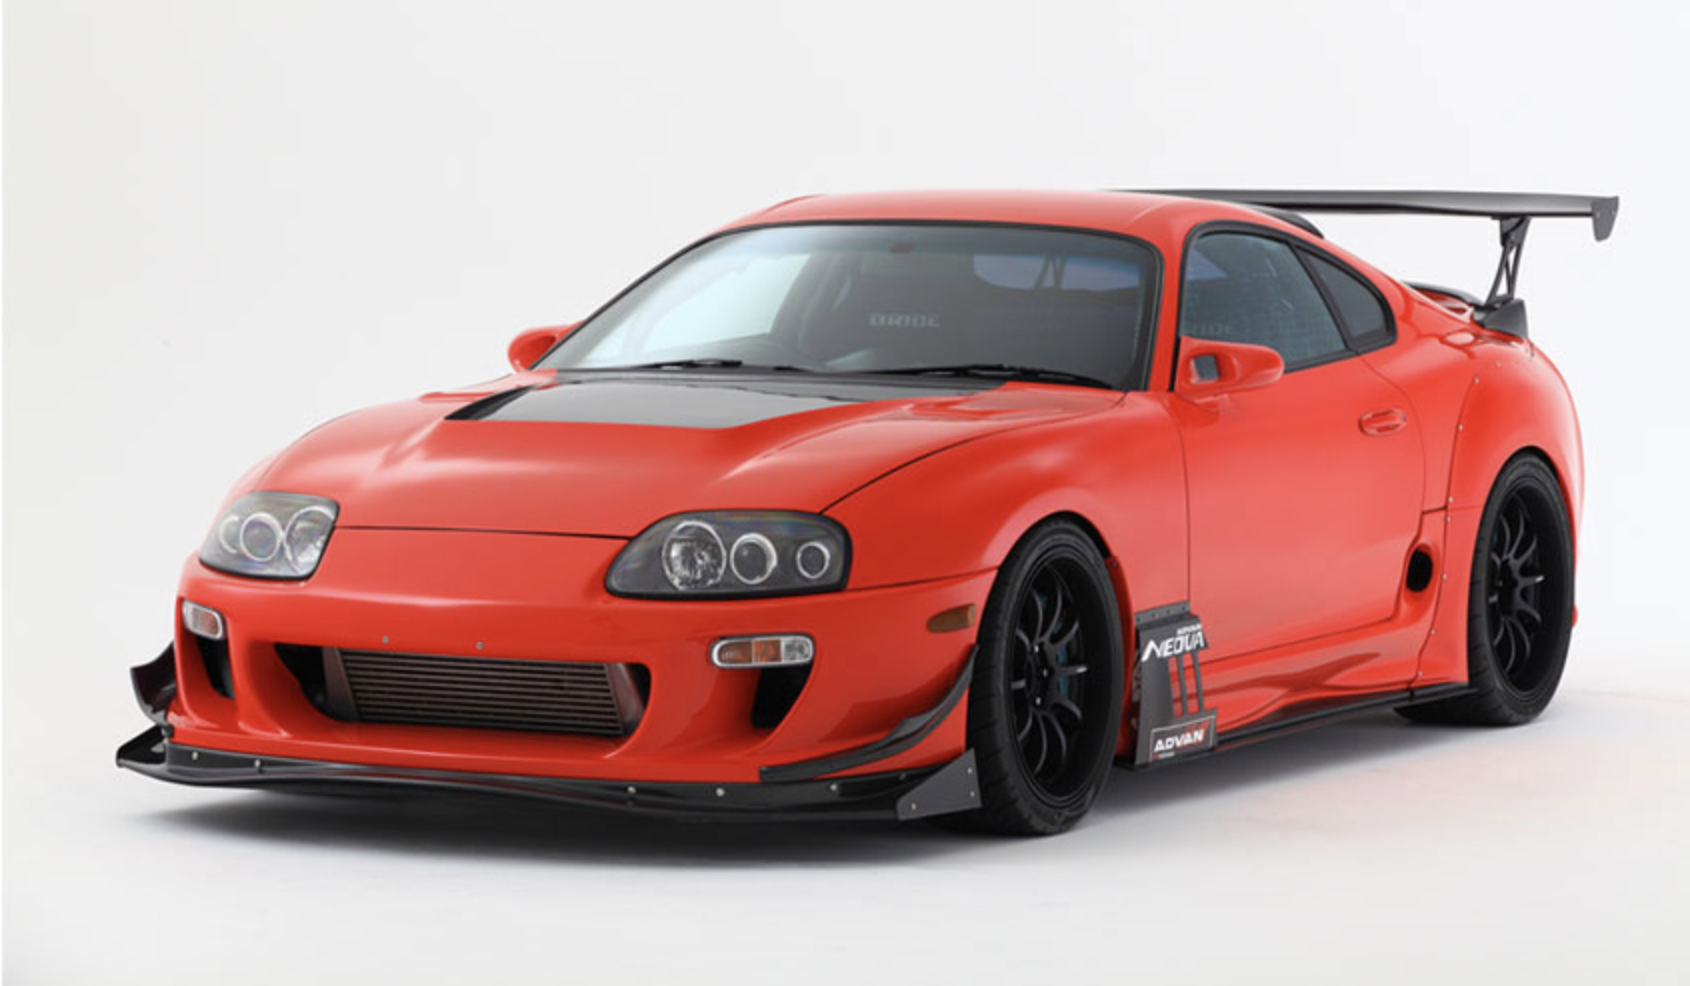 Ridox in conjunction with Varis Japan offer a complete Body kit for the Toy...